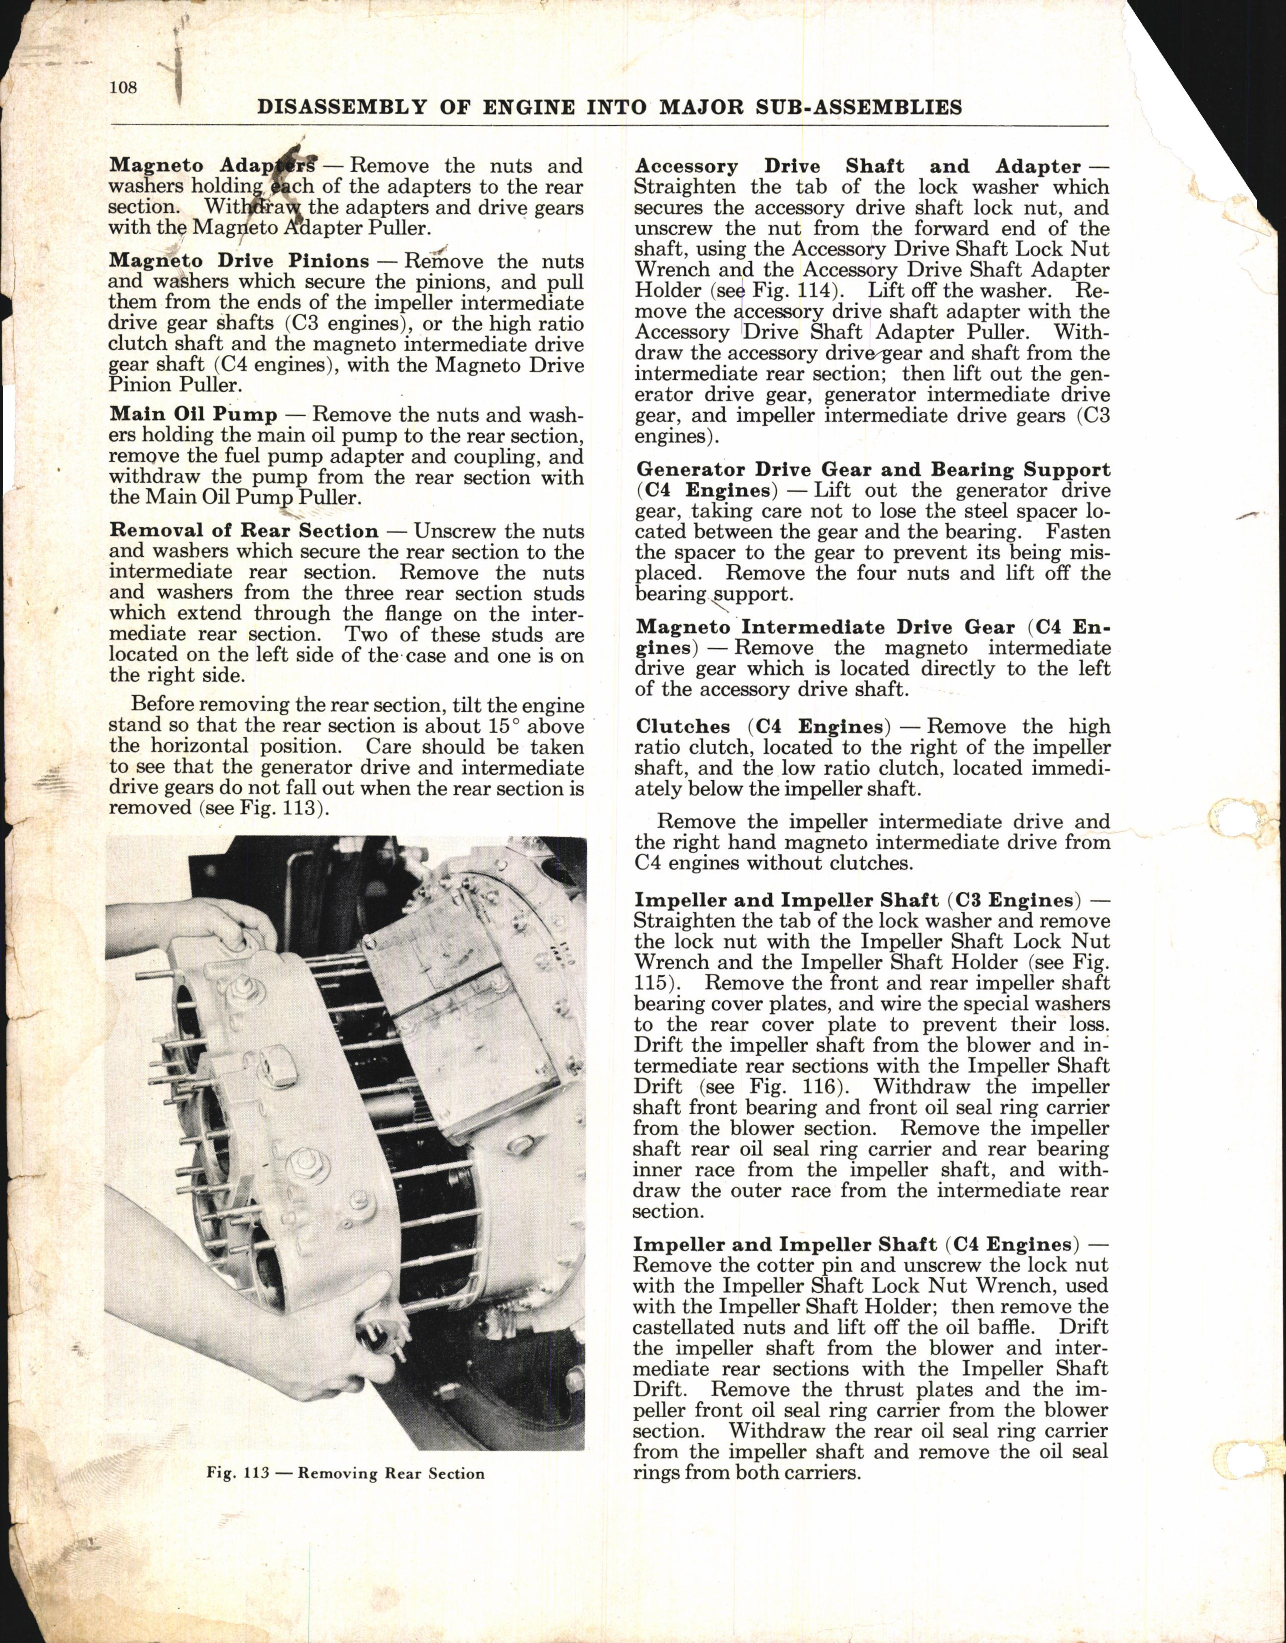 Sample page 6 from AirCorps Library document: Overhaul Manual for Twin Wasp C3 and C4 Engines